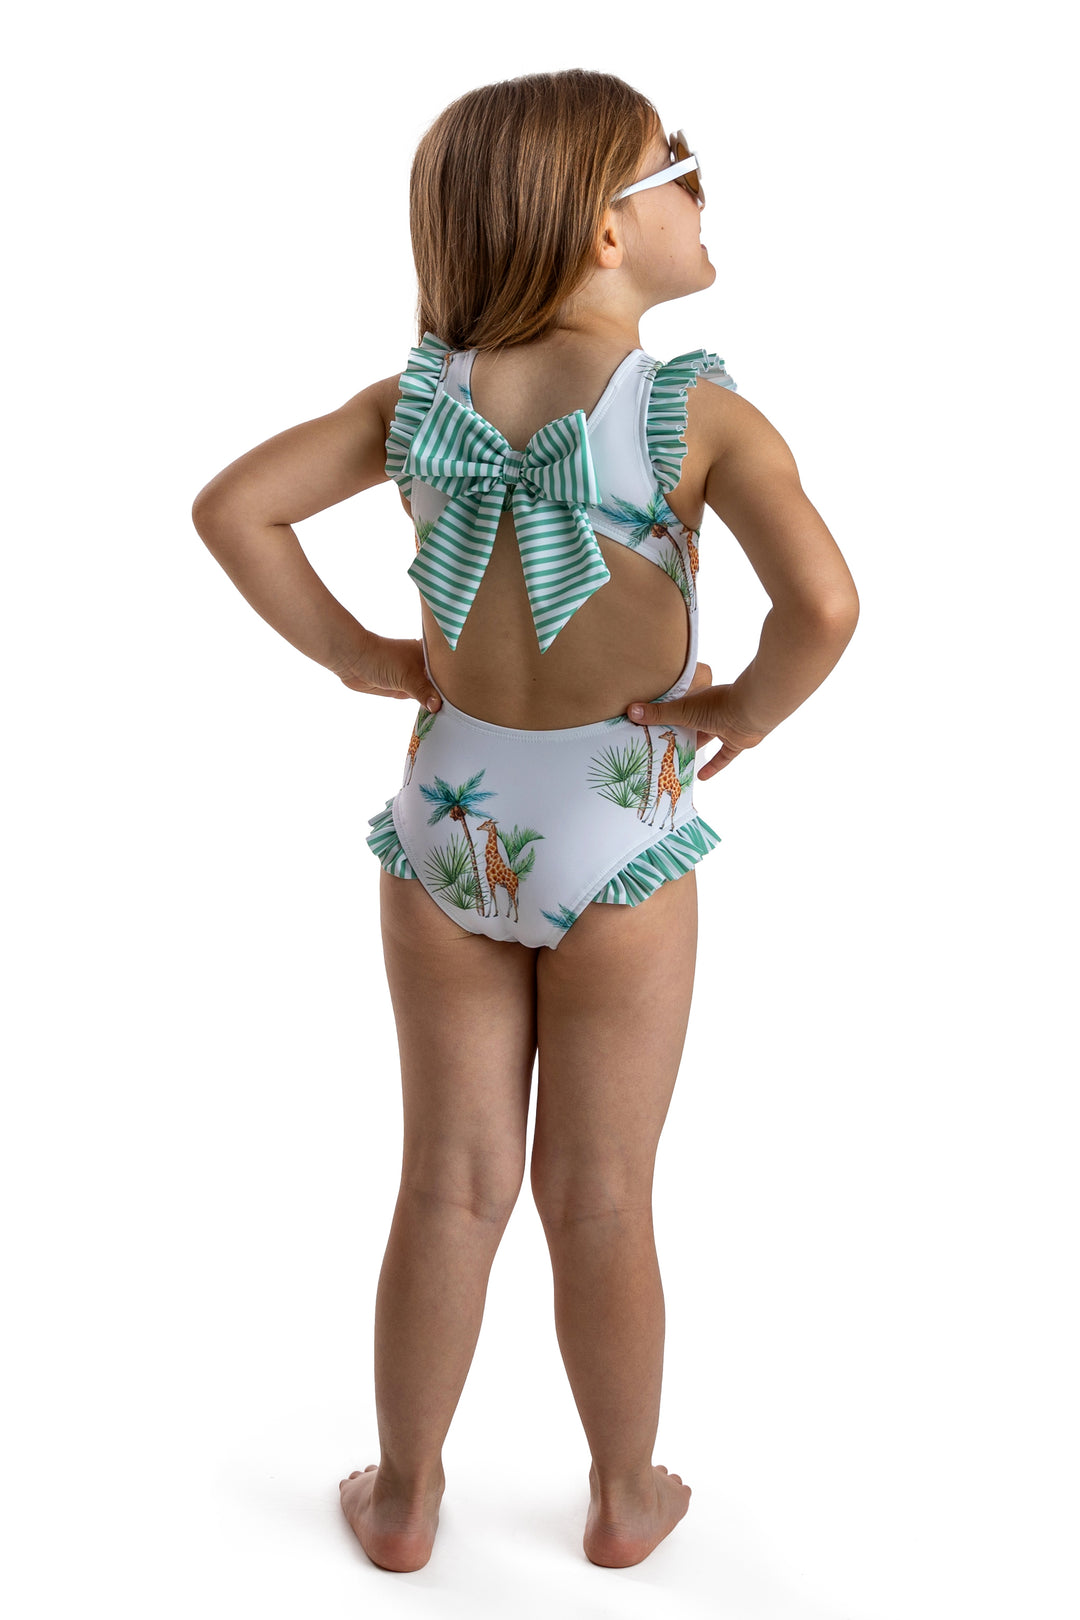 Meia Pata PREORDER - GIRAFFES "La Digue" Swimsuit | Millie and John